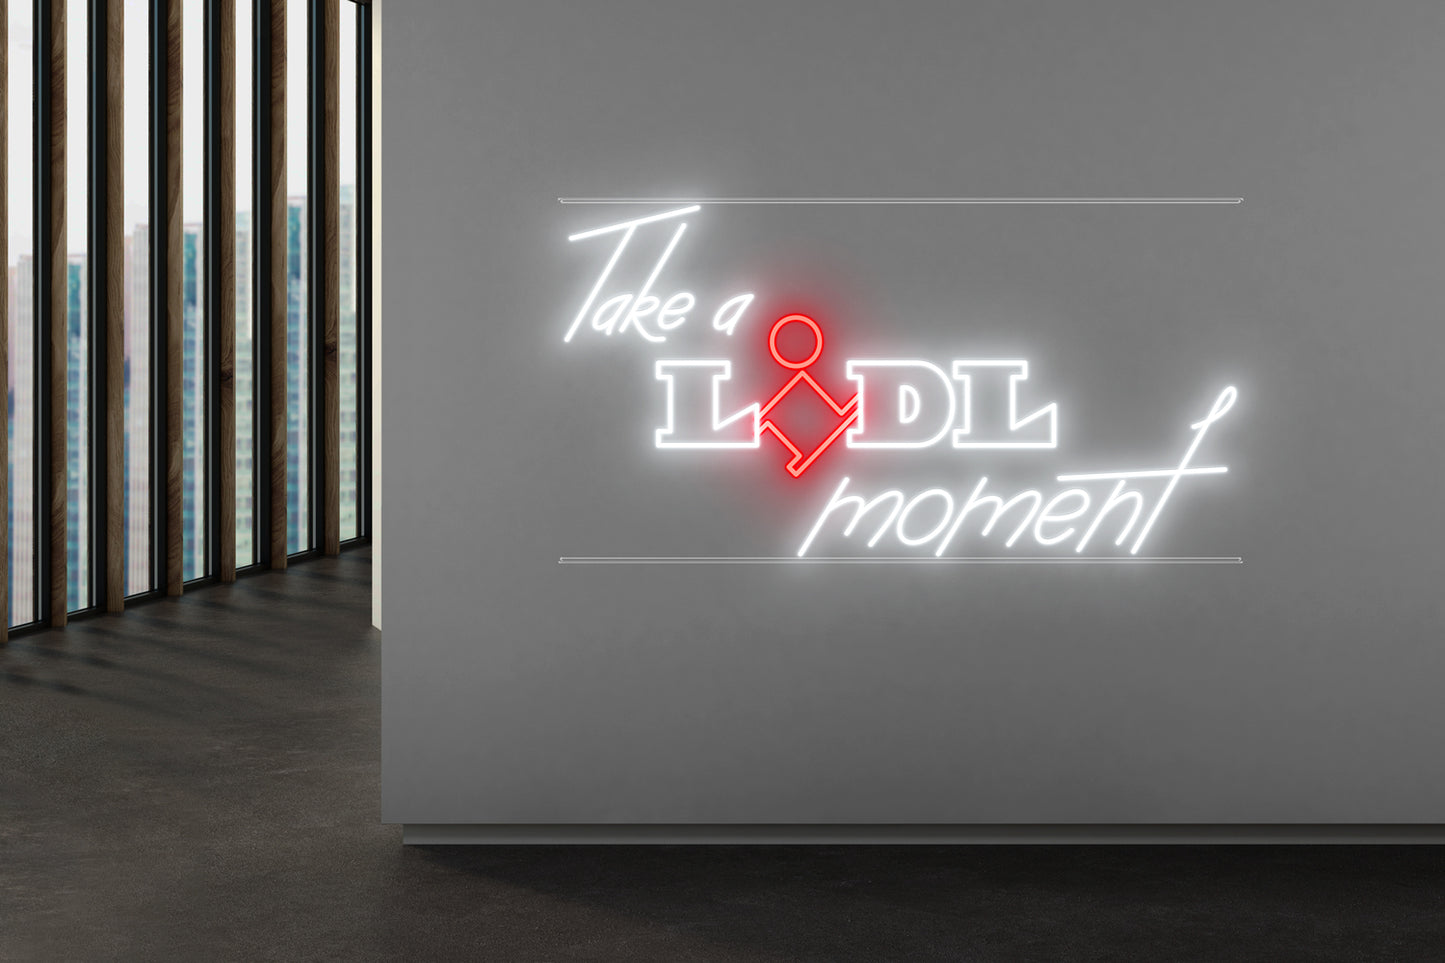 IP67 Outdoor Neon Sign - take a lidl moment V2